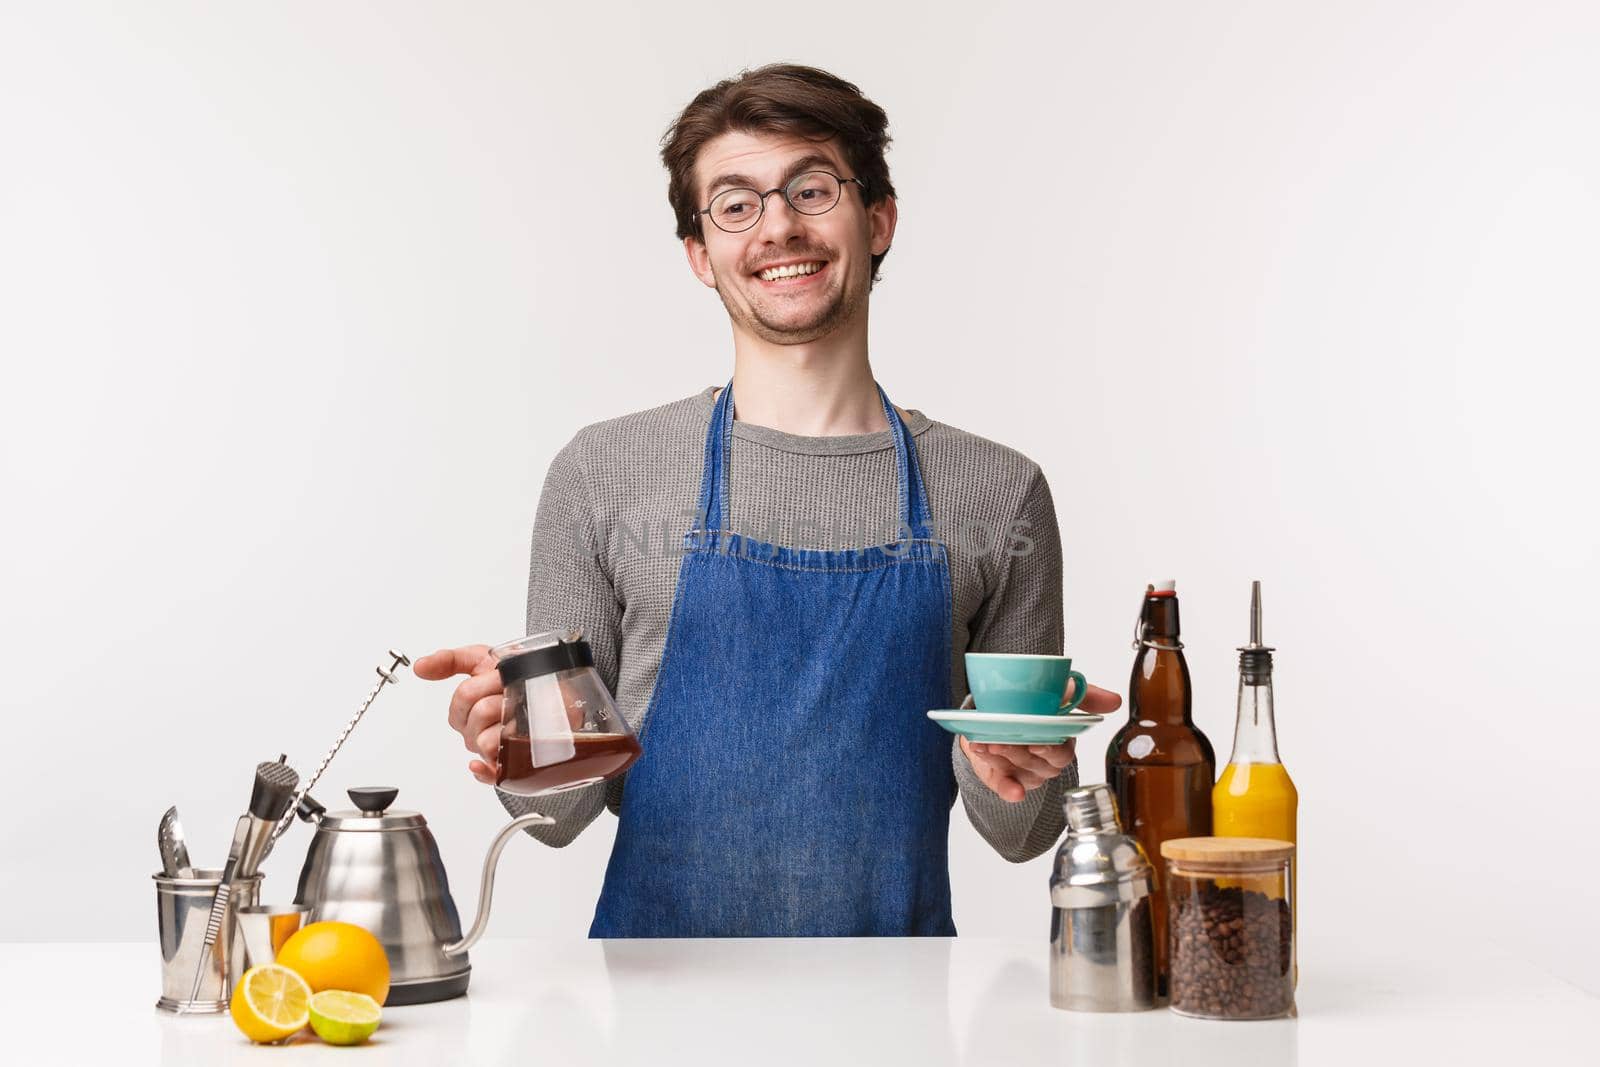 Barista, cafe worker and bartender concept. Portrait of cheerful carefree smiling caucasian man in apron, hold kettle with filter coffee and cup, laughing and look away stand bar counter.